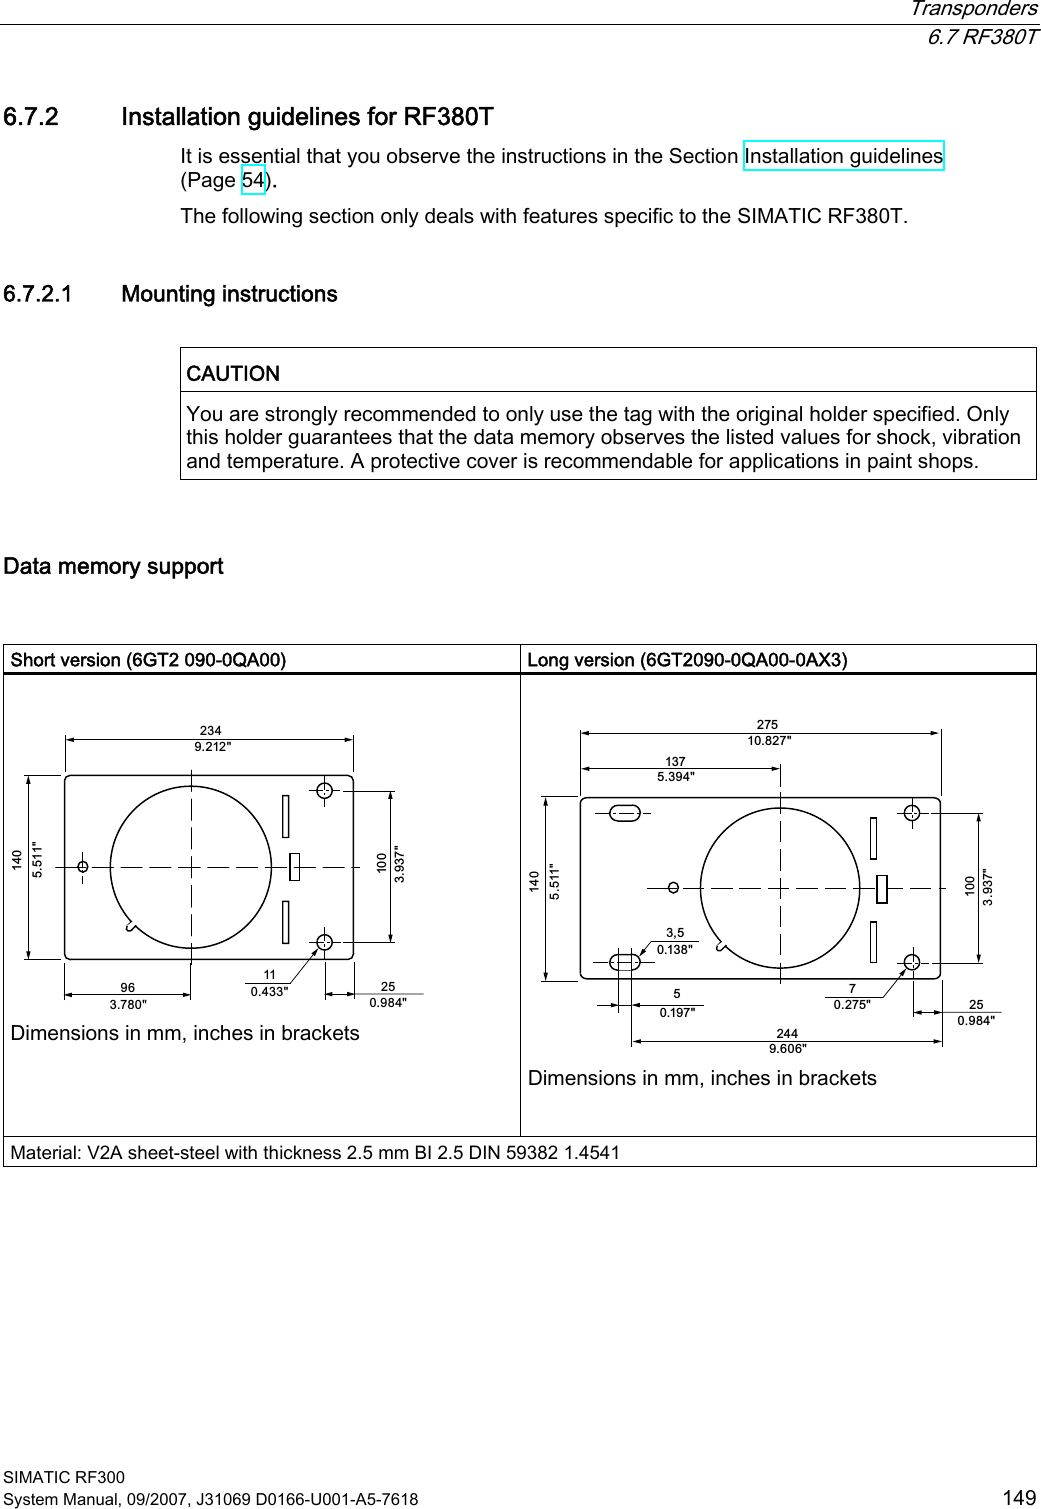  Transponders  6.7 RF380T SIMATIC RF300 System Manual, 09/2007, J31069 D0166-U001-A5-7618  149 6.7.2 Installation guidelines for RF380T It is essential that you observe the instructions in the Section Installation guidelines (Page 54). The following section only deals with features specific to the SIMATIC RF380T. 6.7.2.1 Mounting instructions  CAUTION  You are strongly recommended to only use the tag with the original holder specified. Only this holder guarantees that the data memory observes the listed values for shock, vibration and temperature. A protective cover is recommendable for applications in paint shops.  Data memory support   Short version (6GT2 090-0QA00)  Long version (6GT2090-0QA00-0AX3)   Dimensions in mm, inches in brackets    Dimensions in mm, inches in brackets  Material: V2A sheet-steel with thickness 2.5 mm BI 2.5 DIN 59382 1.4541 